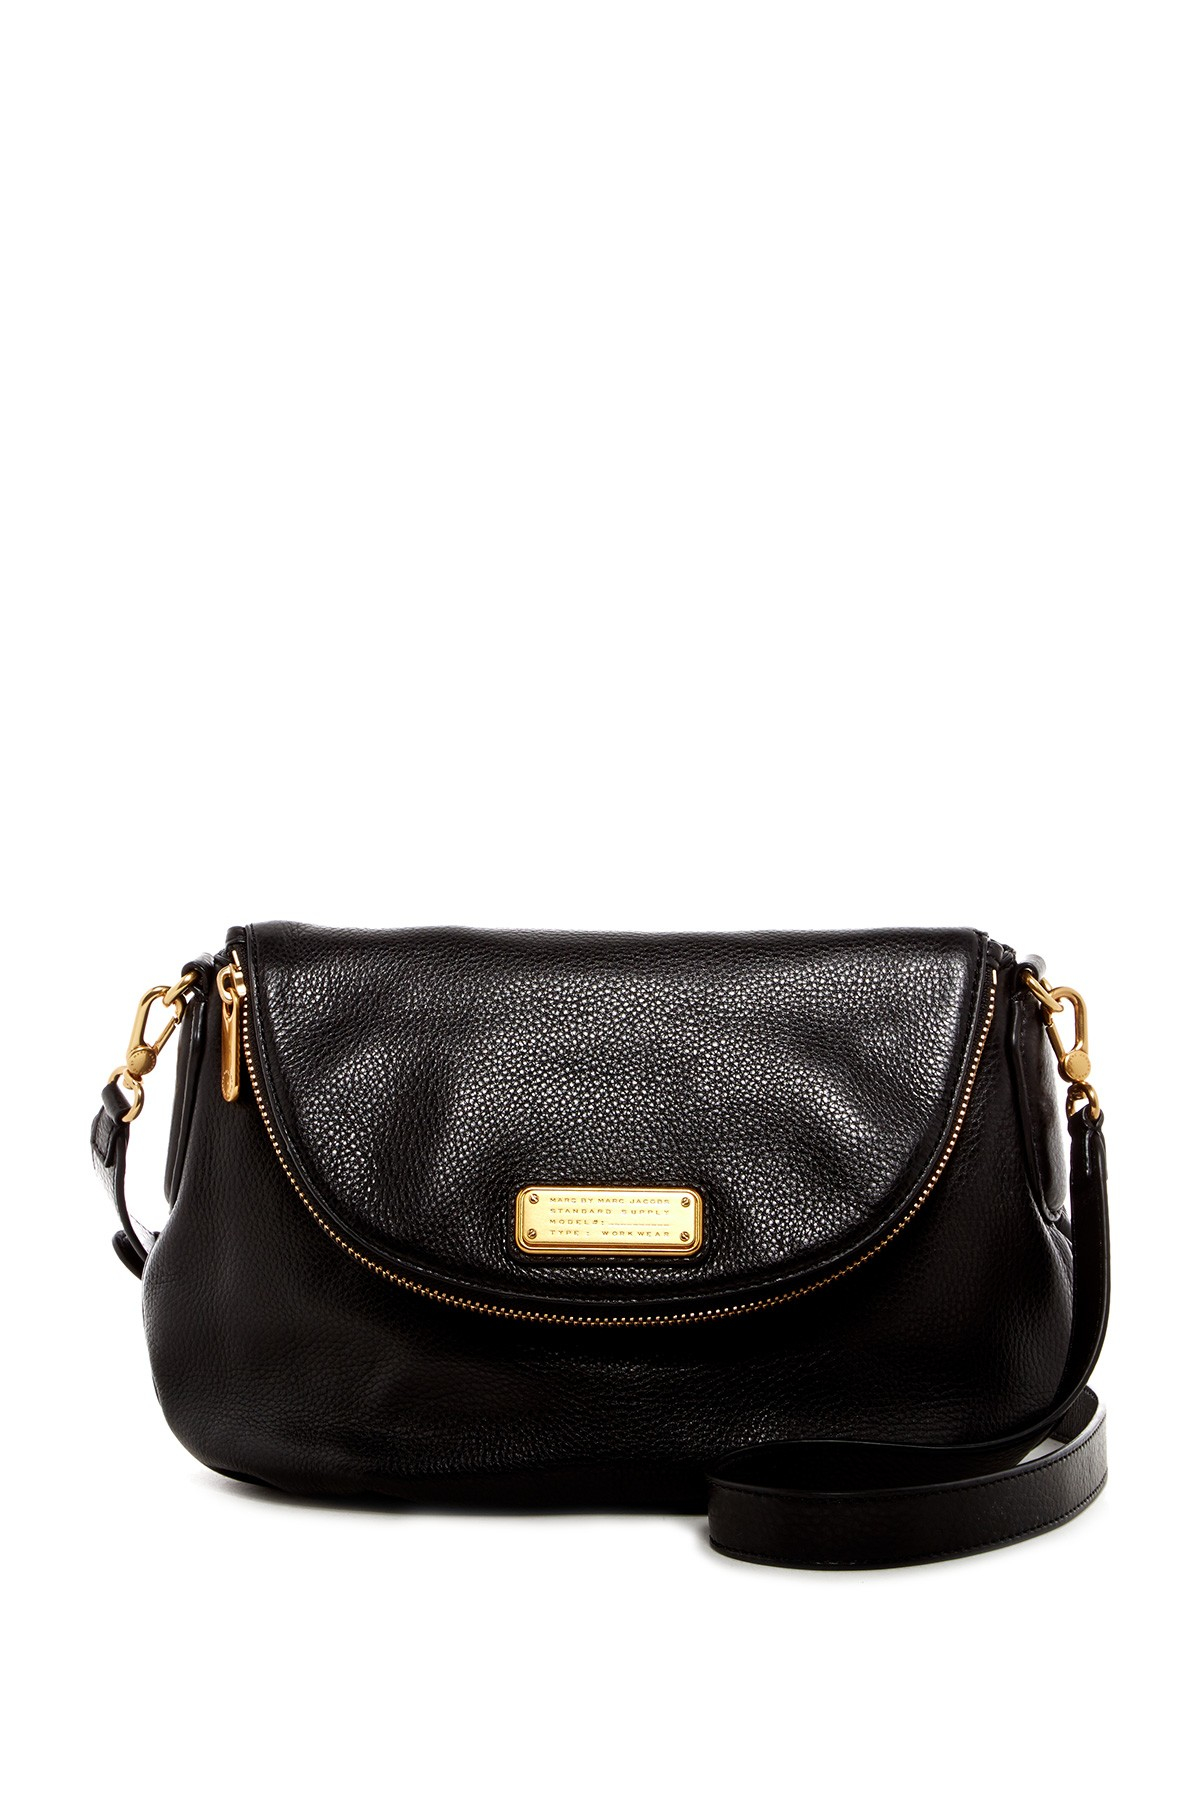 Marc by marc jacobs New Q Natasha Leather Crossbody in Black | Lyst